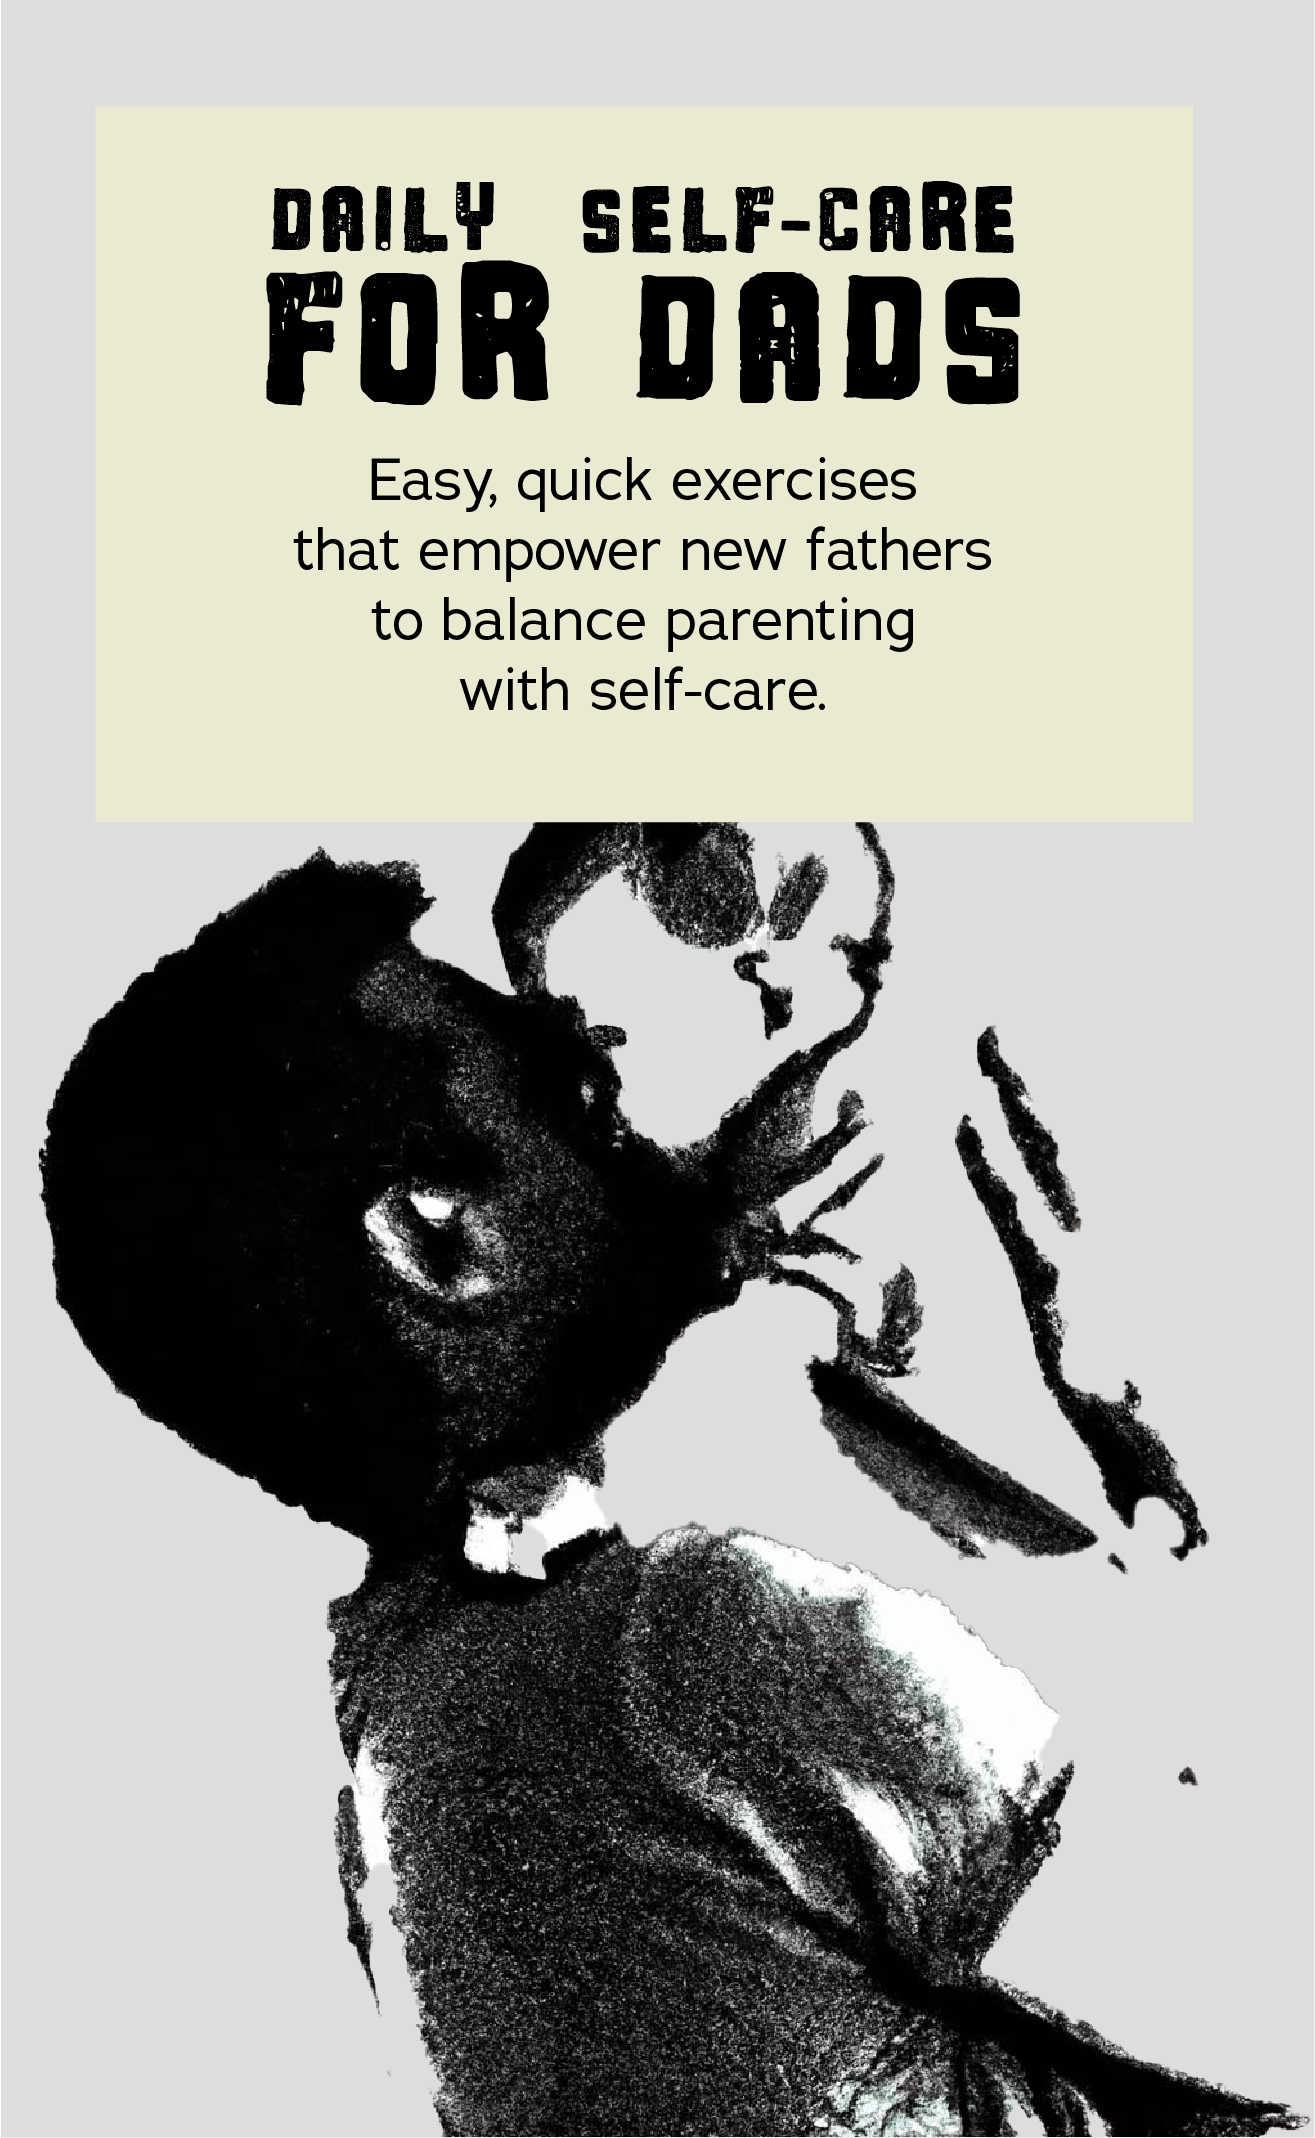 Daily Self-Care For Dads: Easy, quick exercises that empower new fathers to balance parenting with self-care.